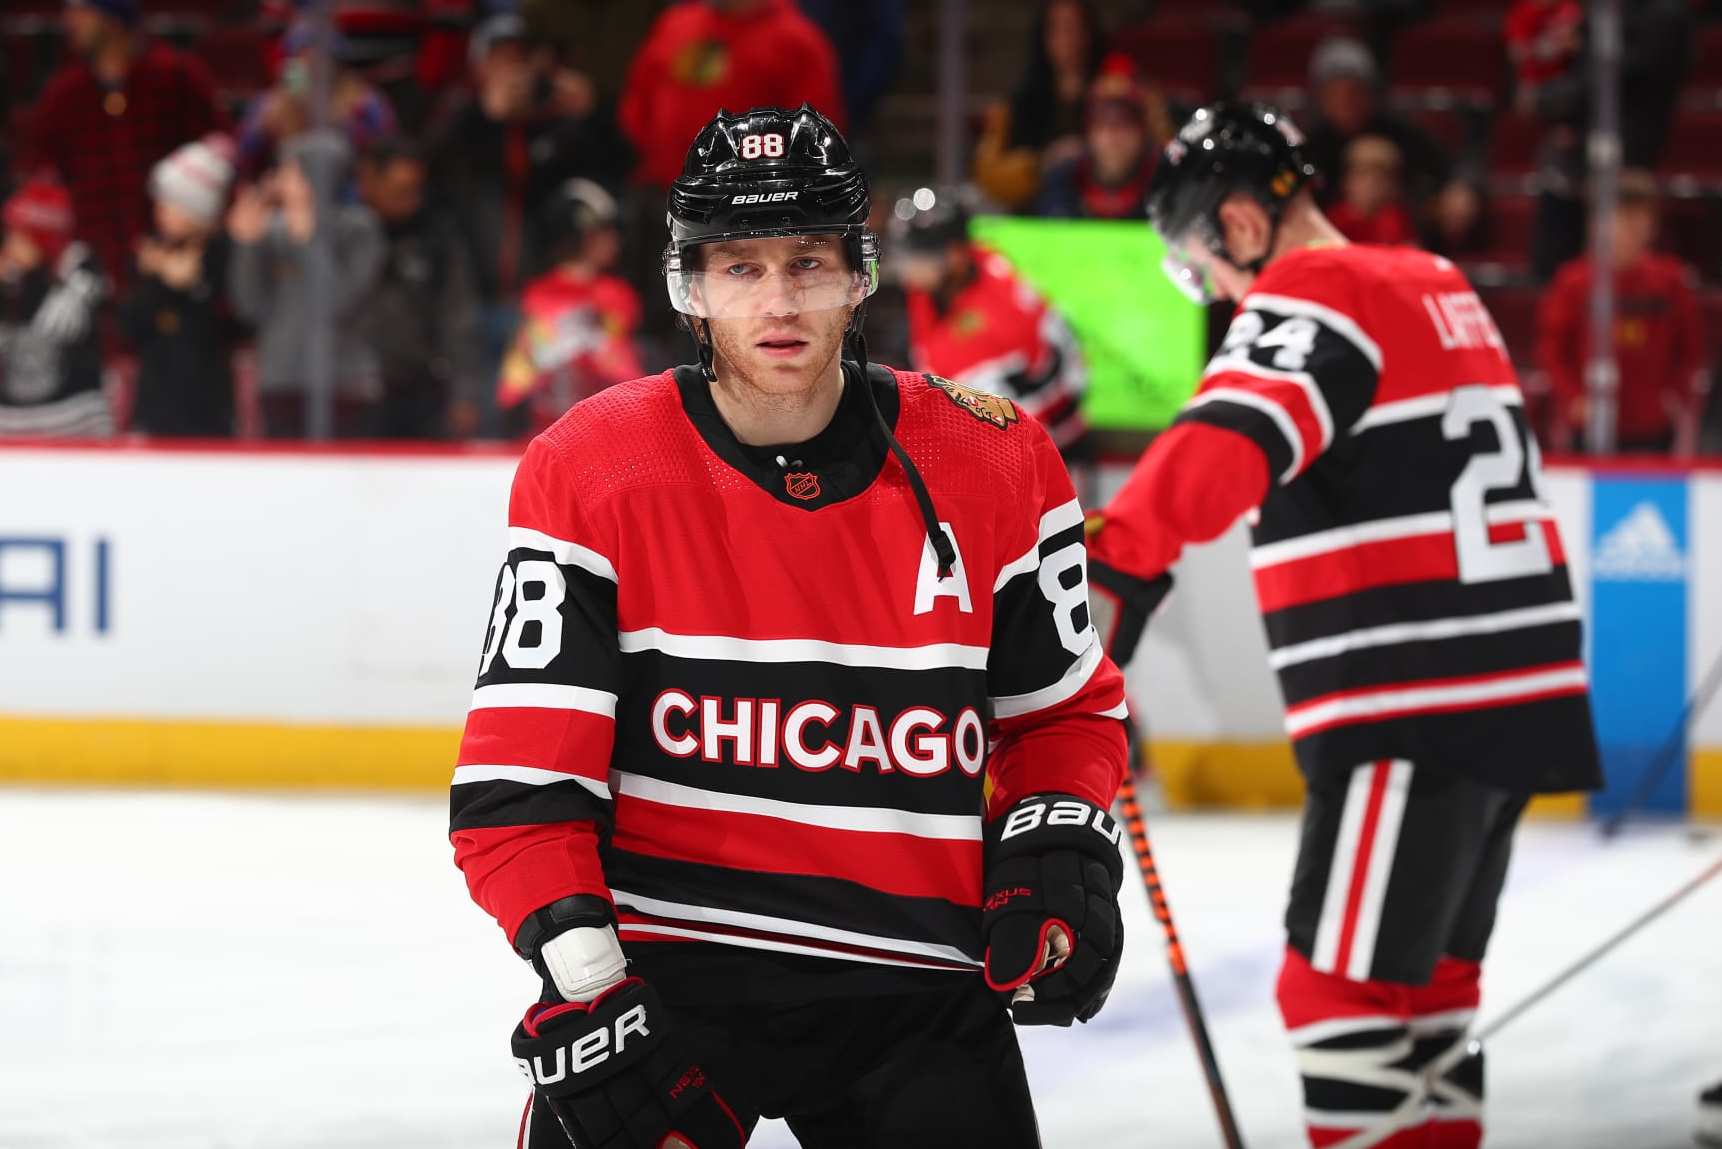 Might the rebuilding Blackhawks be good trade partners for the cap